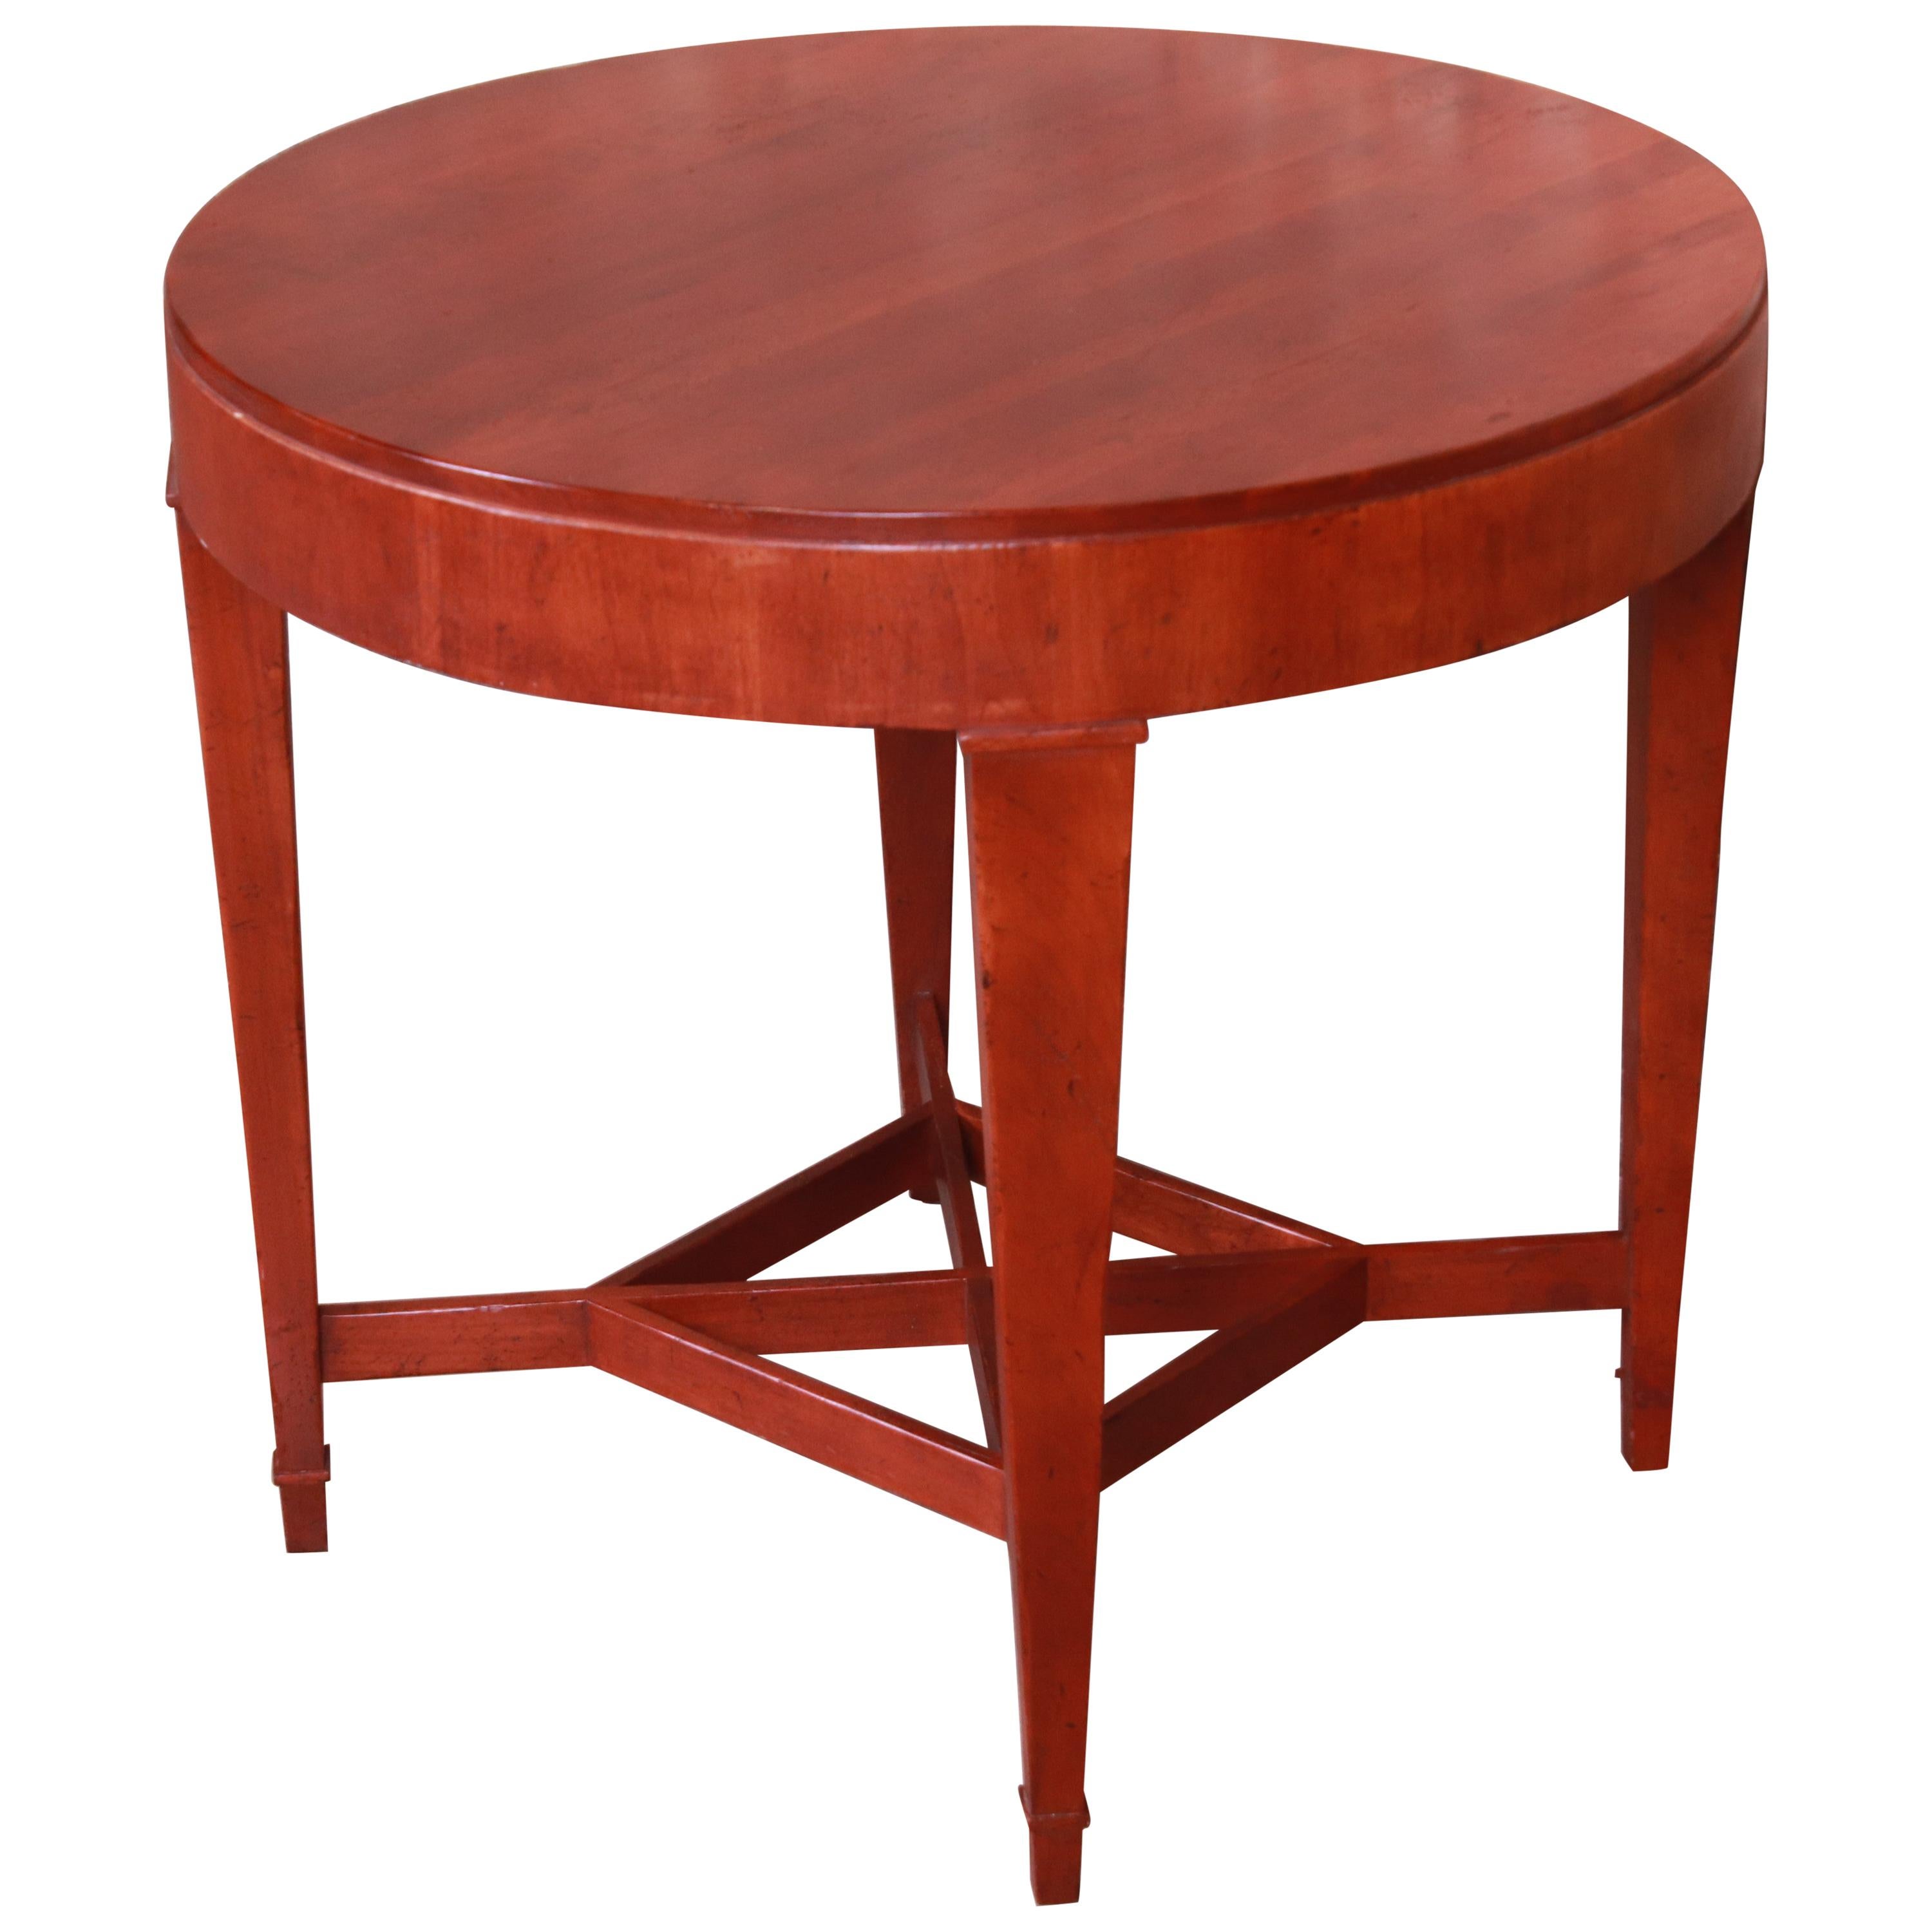 Baker Furniture Milling Road Cherrywood Tea Table or Occasional Side Table